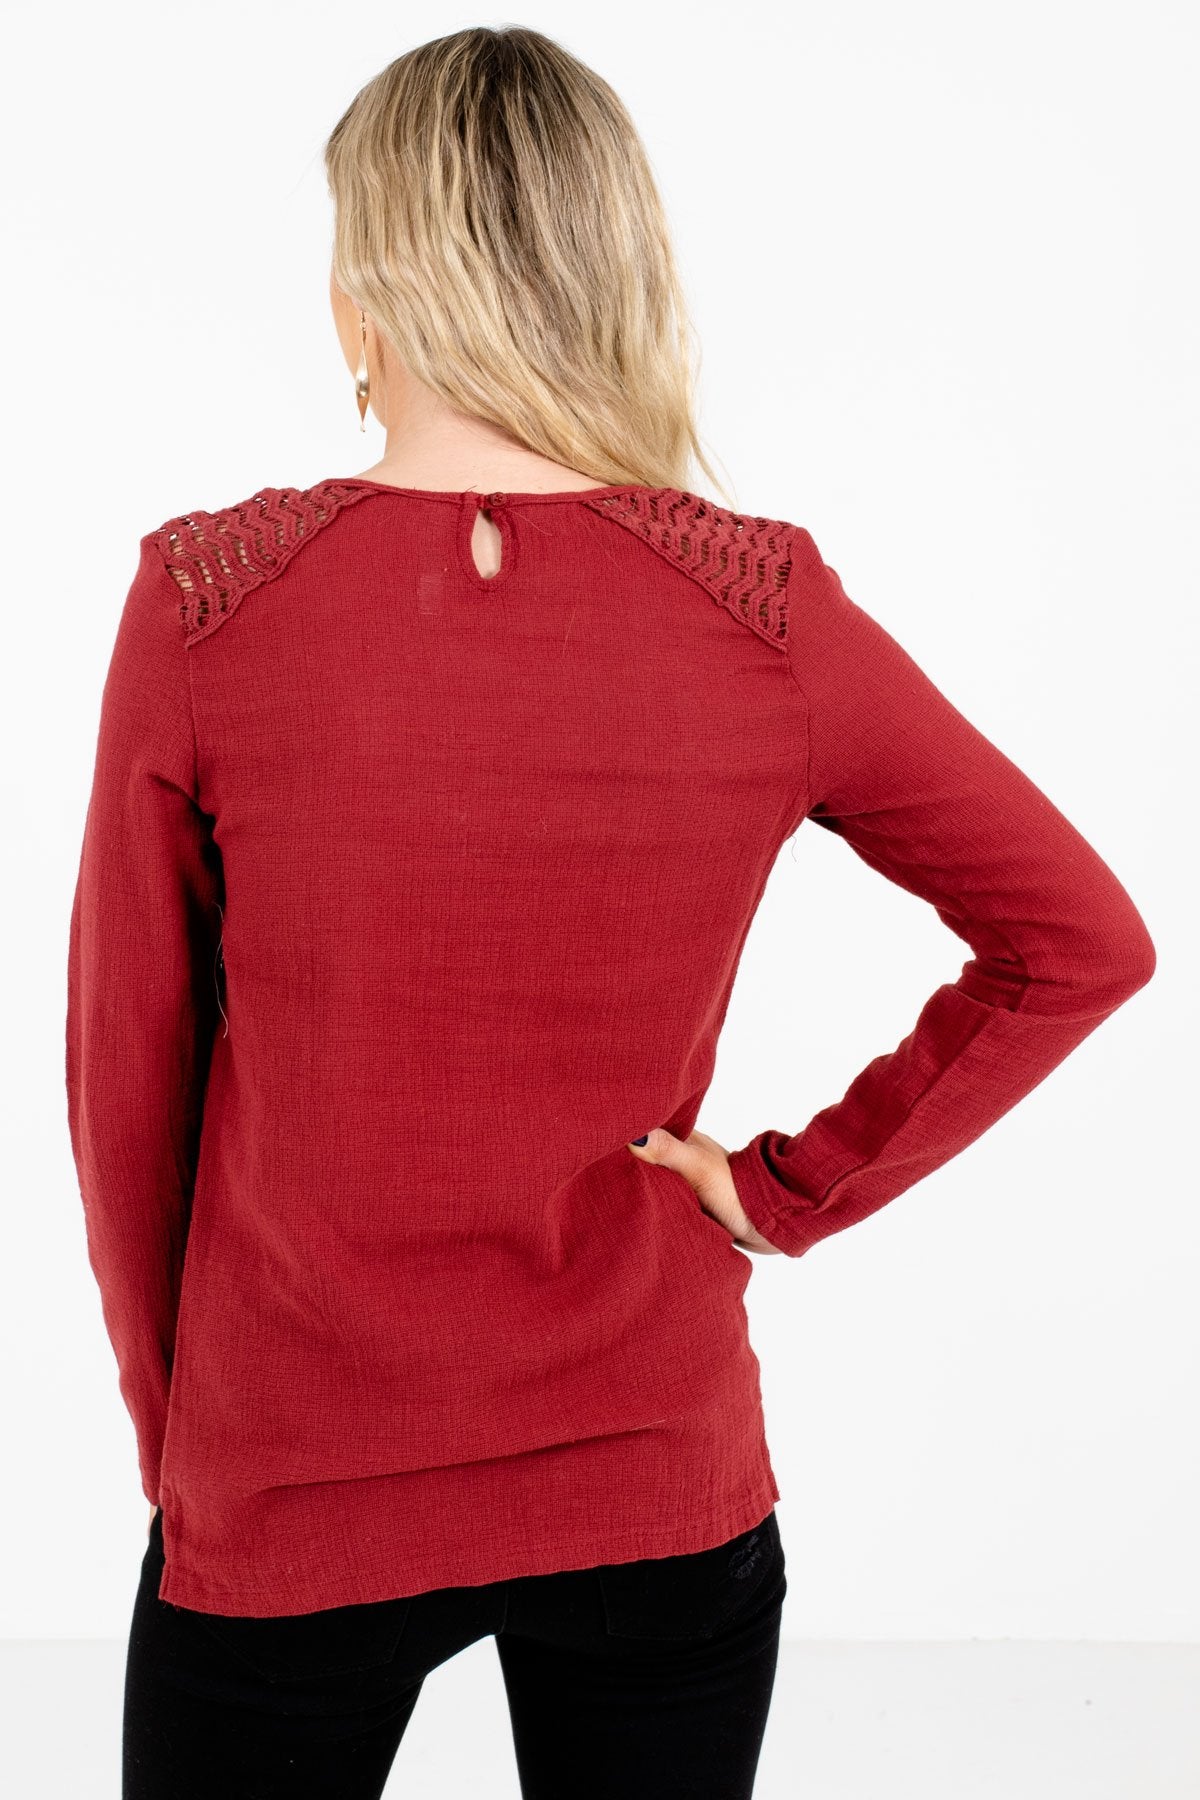 Women’s Rust Red Long Sleeve Boutique Tops